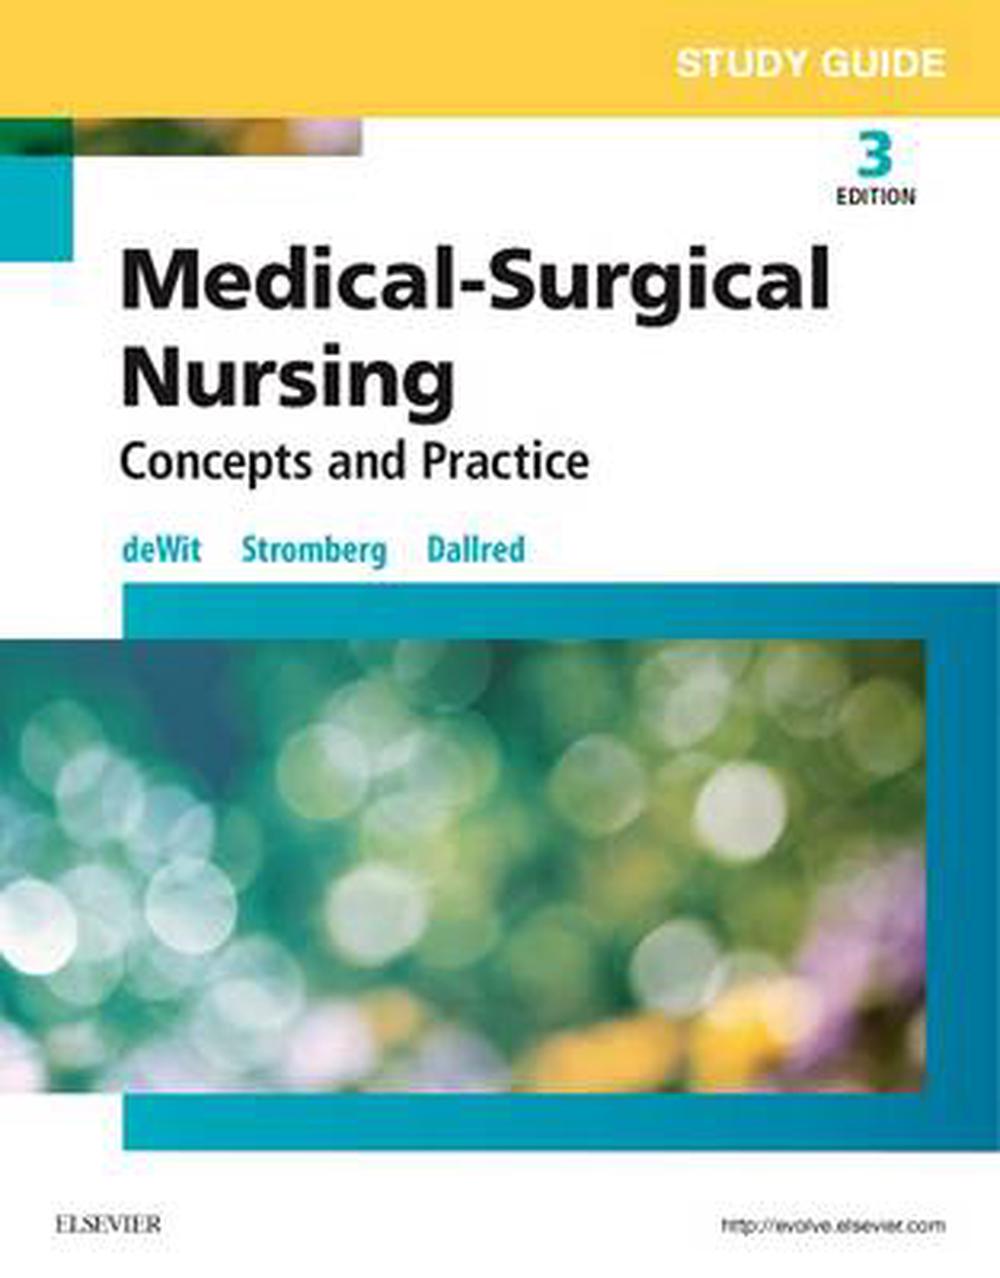 Study Guide for MedicalSurgical Nursing Concepts and Practice by